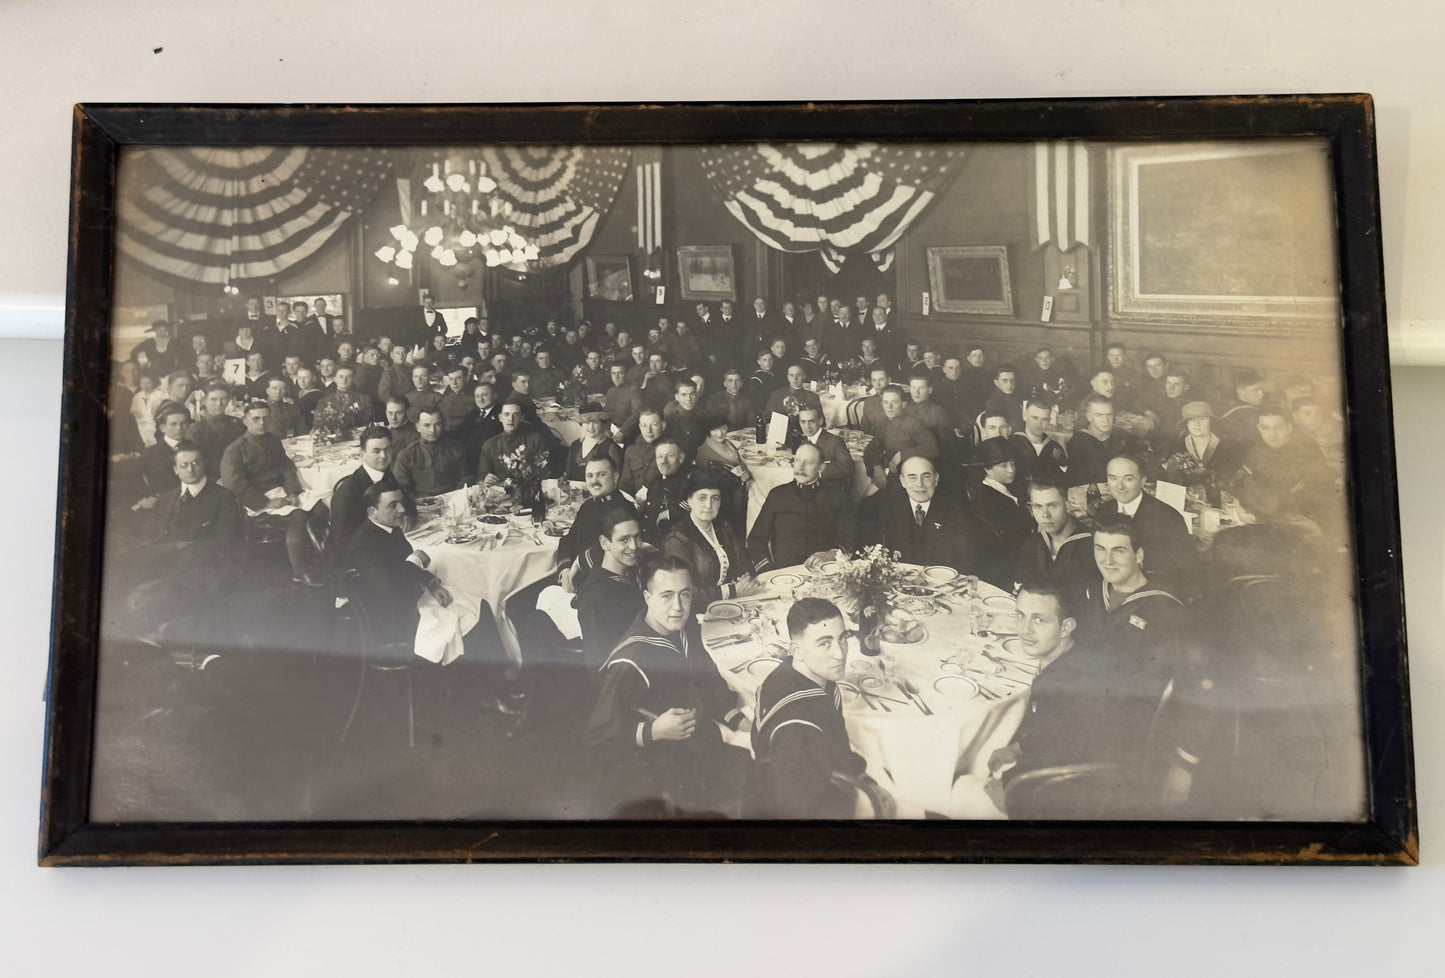 Vintage banquet panorama with sailors